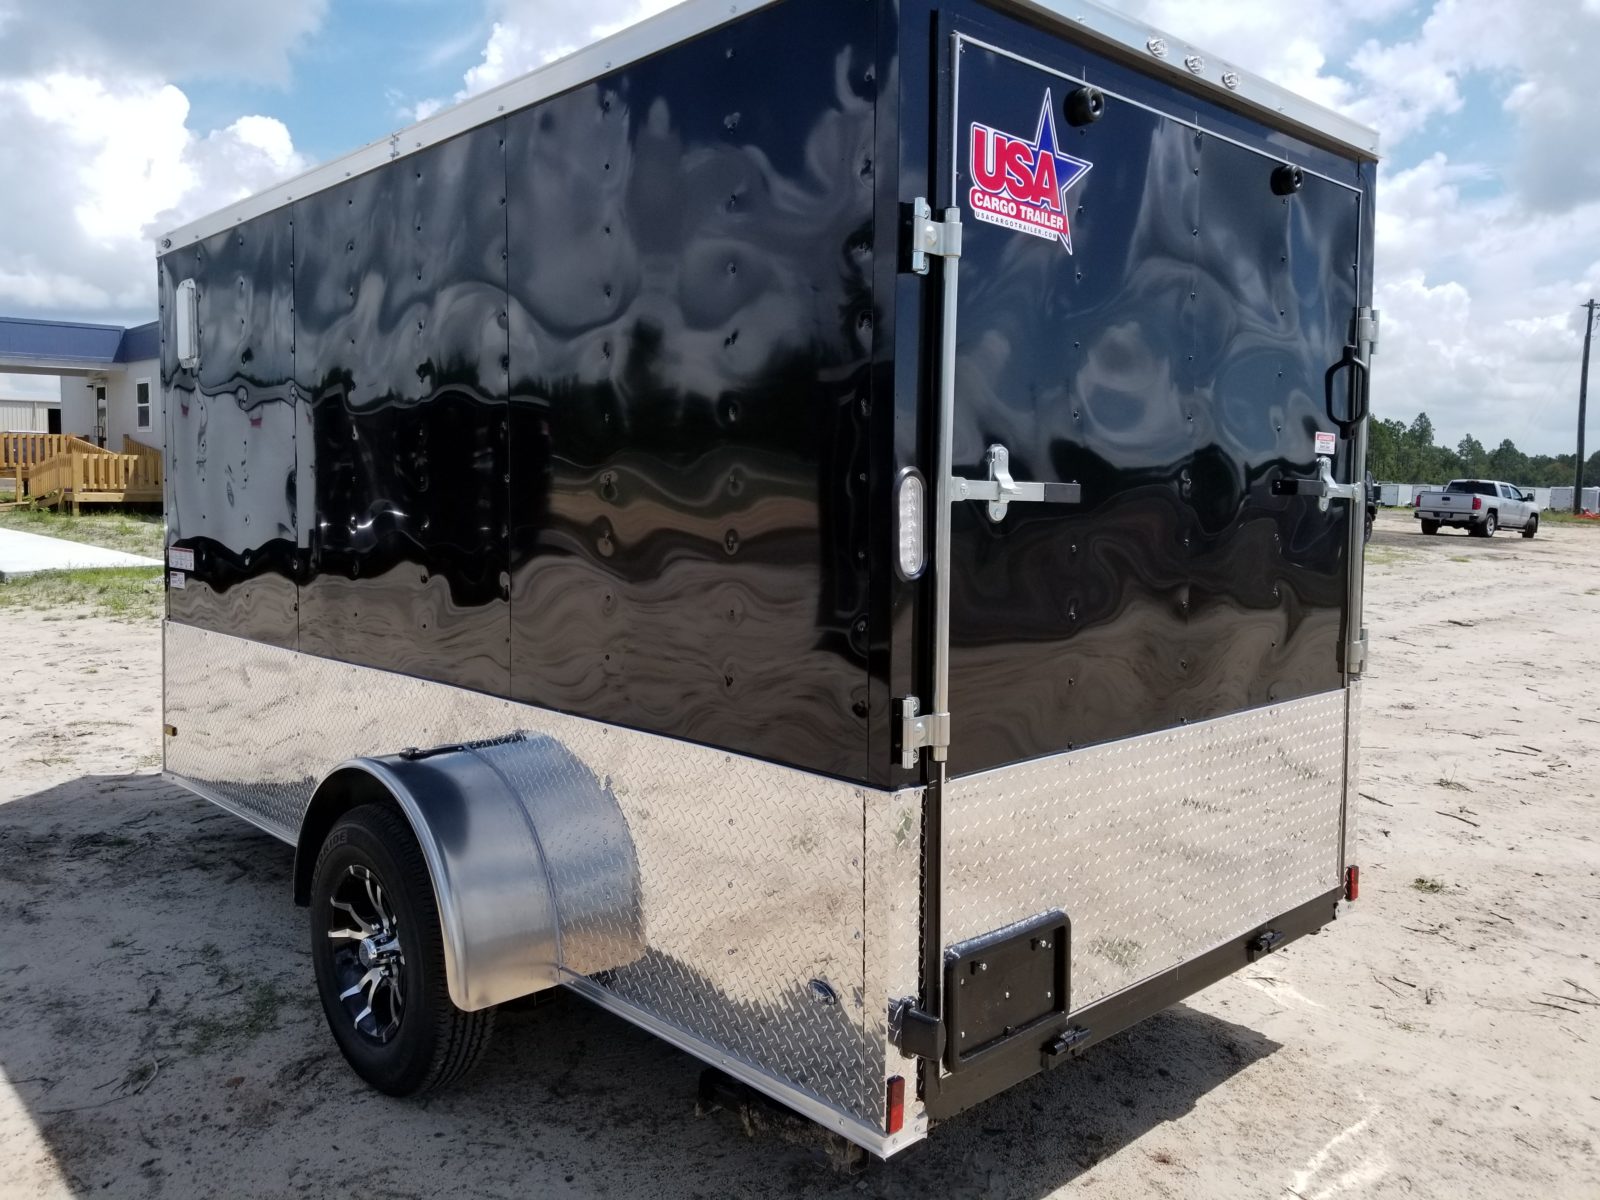 Utility Trailers For Sale Near You